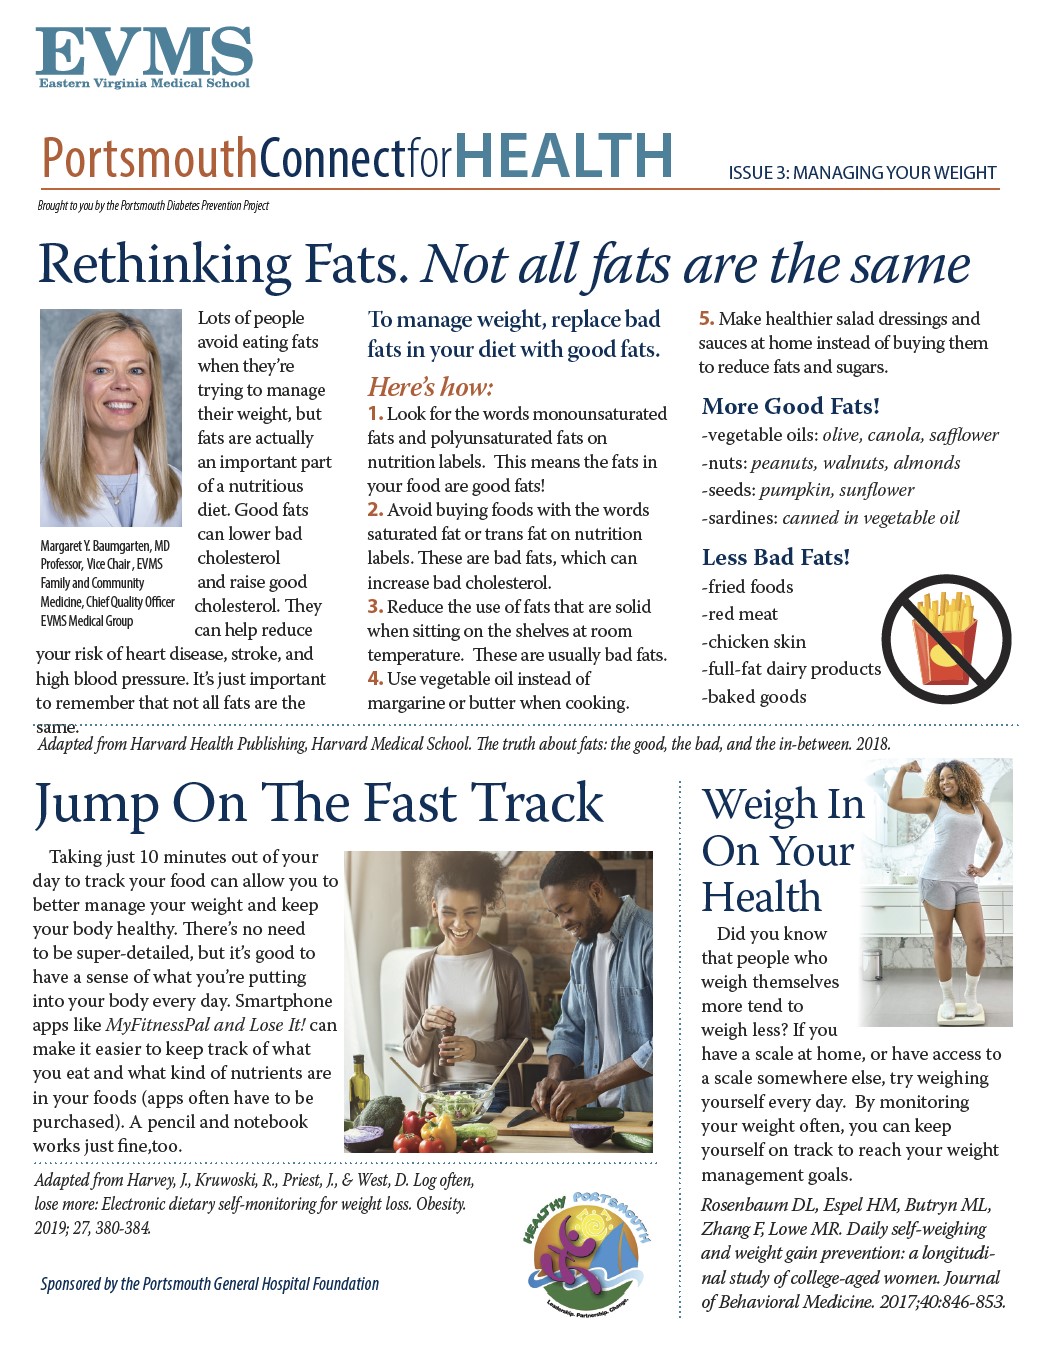 Newsletter cover showing articles 